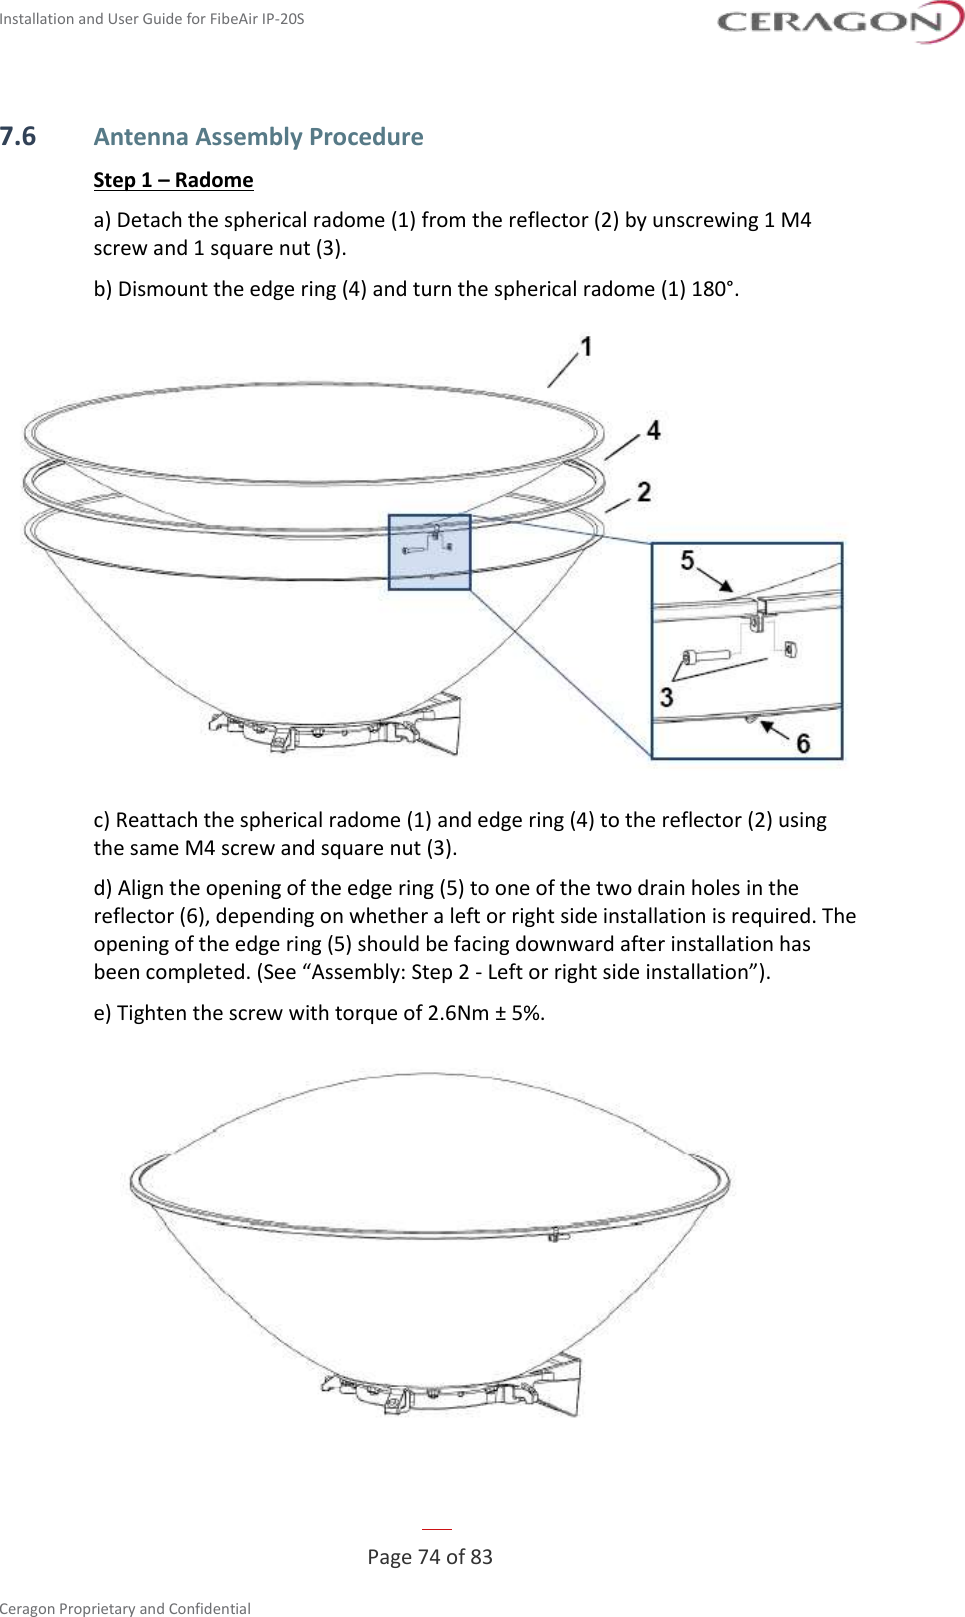 Installation and User Guide for FibeAir IP-20S   Page 74 of 83  Ceragon Proprietary and Confidential     7.6 Antenna Assembly Procedure Step 1 – Radome a) Detach the spherical radome (1) from the reflector (2) by unscrewing 1 M4 screw and 1 square nut (3). b) Dismount the edge ring (4) and turn the spherical radome (1) 180°.  c) Reattach the spherical radome (1) and edge ring (4) to the reflector (2) using the same M4 screw and square nut (3). d) Align the opening of the edge ring (5) to one of the two drain holes in the reflector (6), depending on whether a left or right side installation is required. The opening of the edge ring (5) should be facing downward after installation has been completed. (See “Assembly: Step 2 - Left or right side installation”). e) Tighten the screw with torque of 2.6Nm ± 5%.  